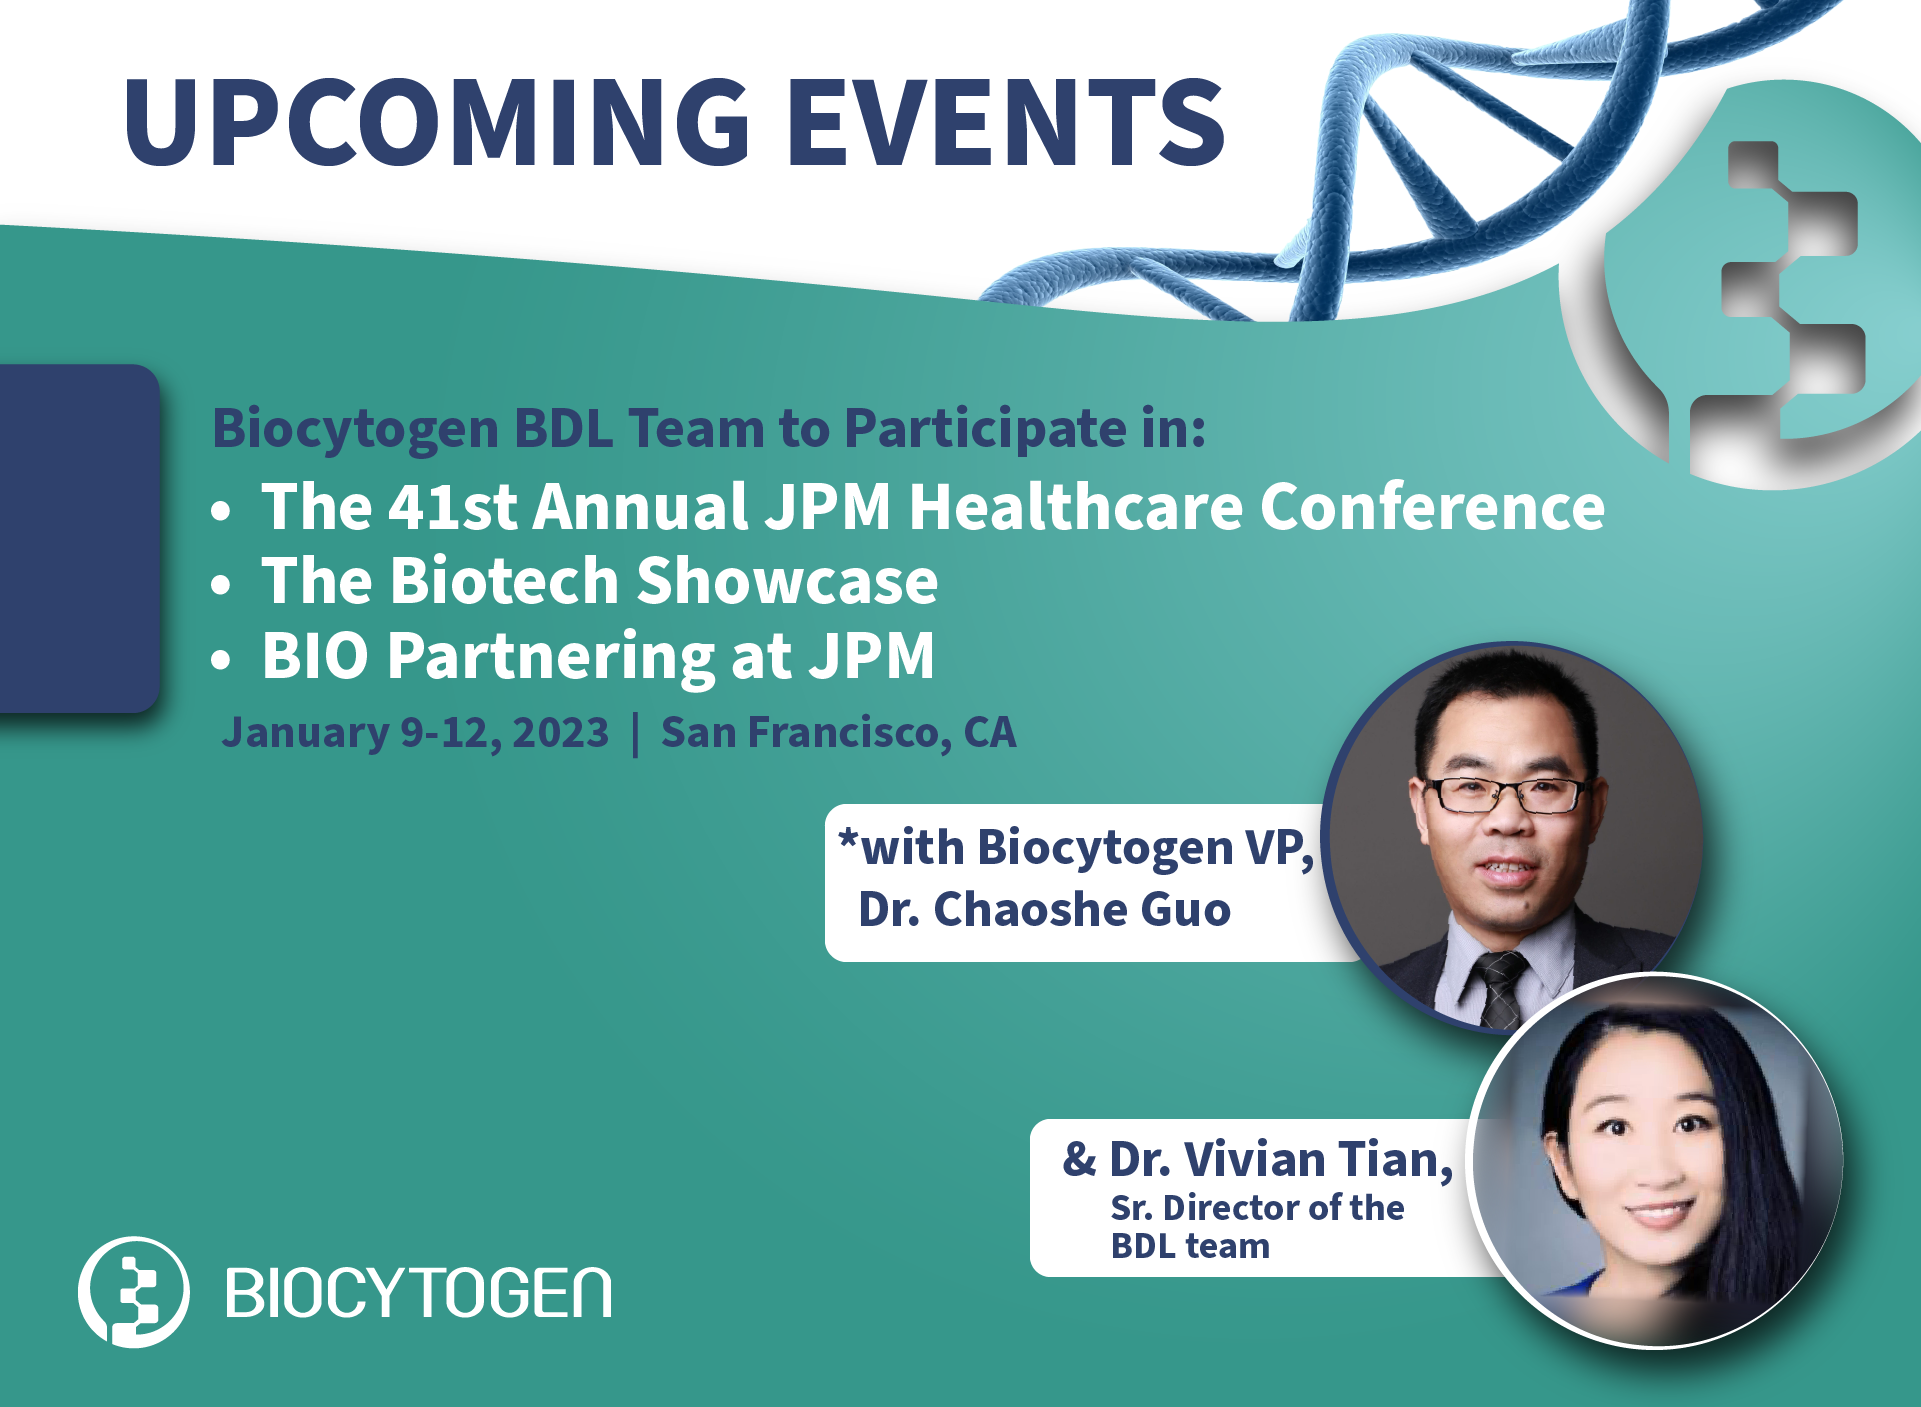 Biocytogen BDL Team to Participate in the 41st Annual JPM Healthcare